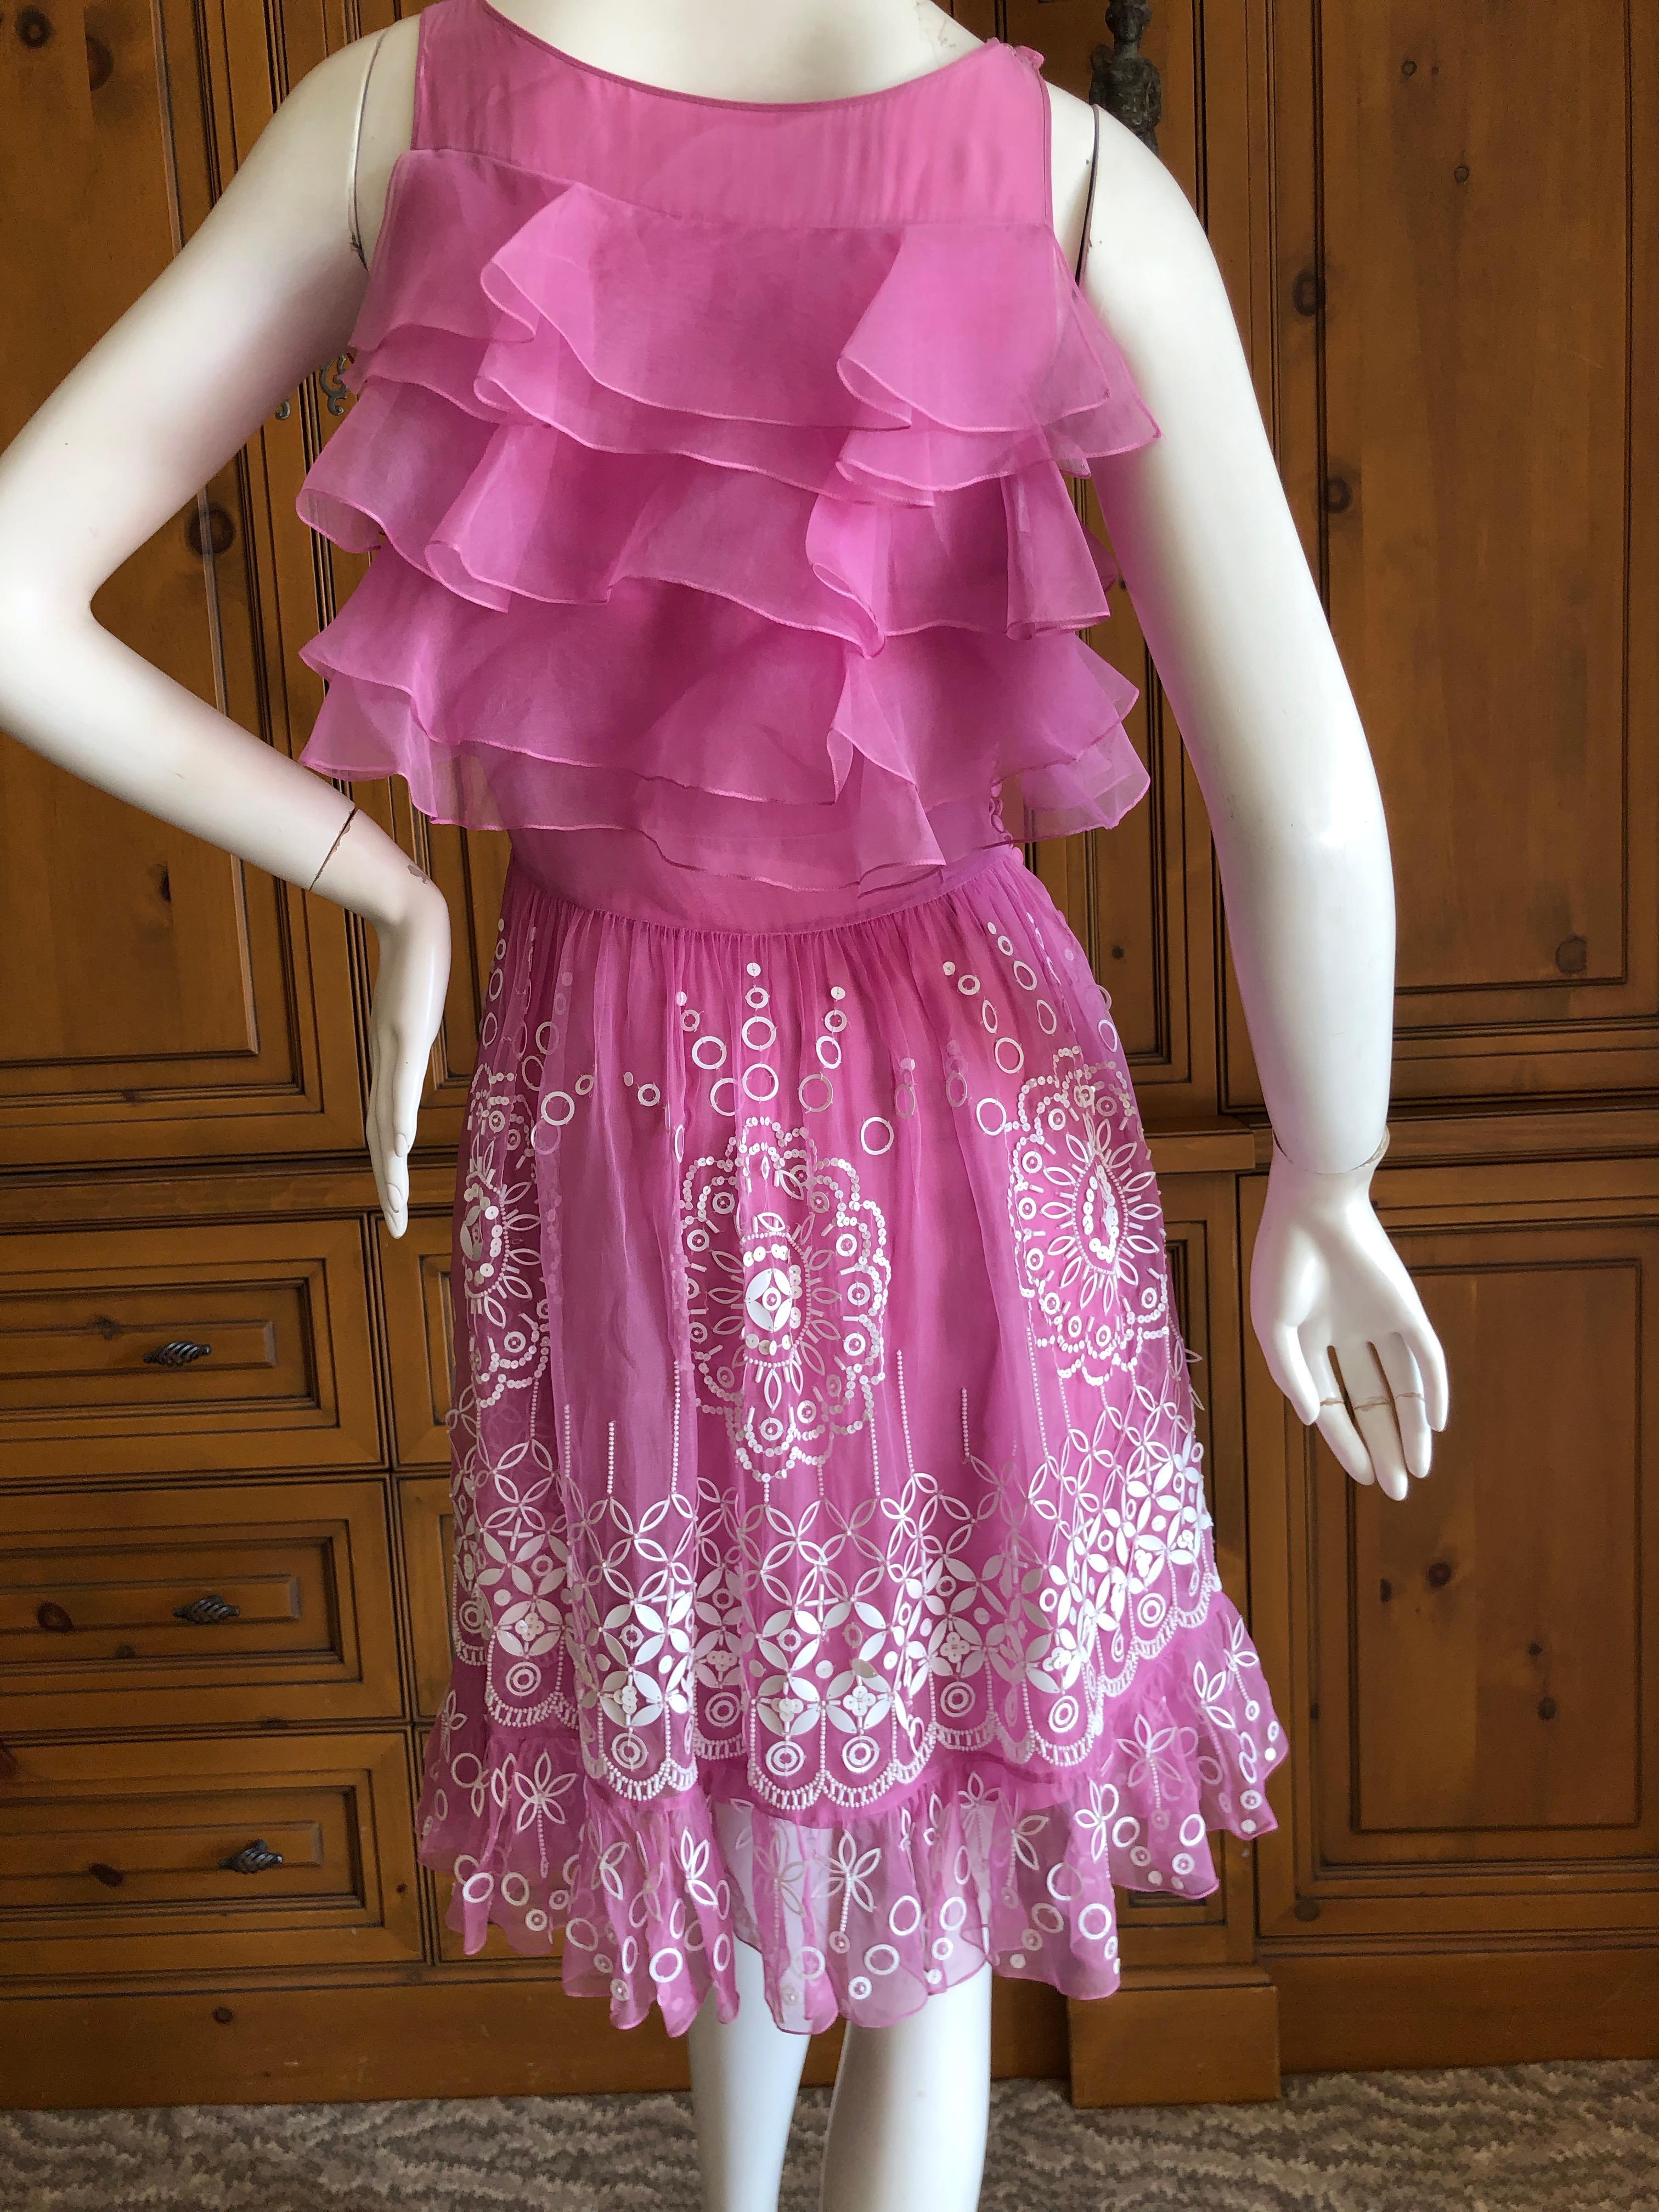 Christian Dior by John Galliano Pink Silk Dress with White Embellishments For Sale 2